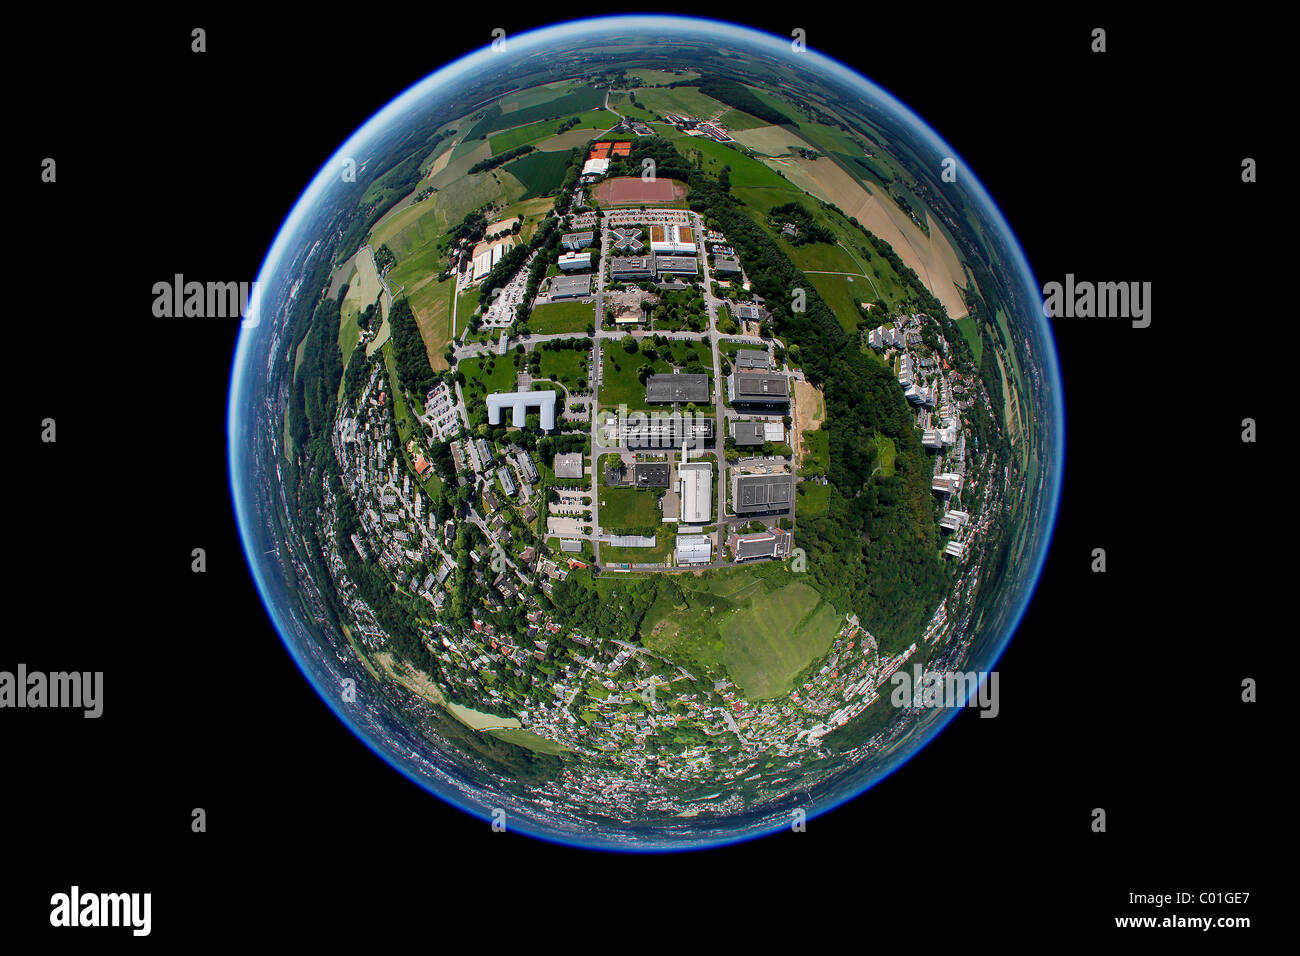 Aerial view, fisheye lens, Bayer Schering research centre, Bayer Schering Pharma AG, a German pharmaceutical company Stock Photo